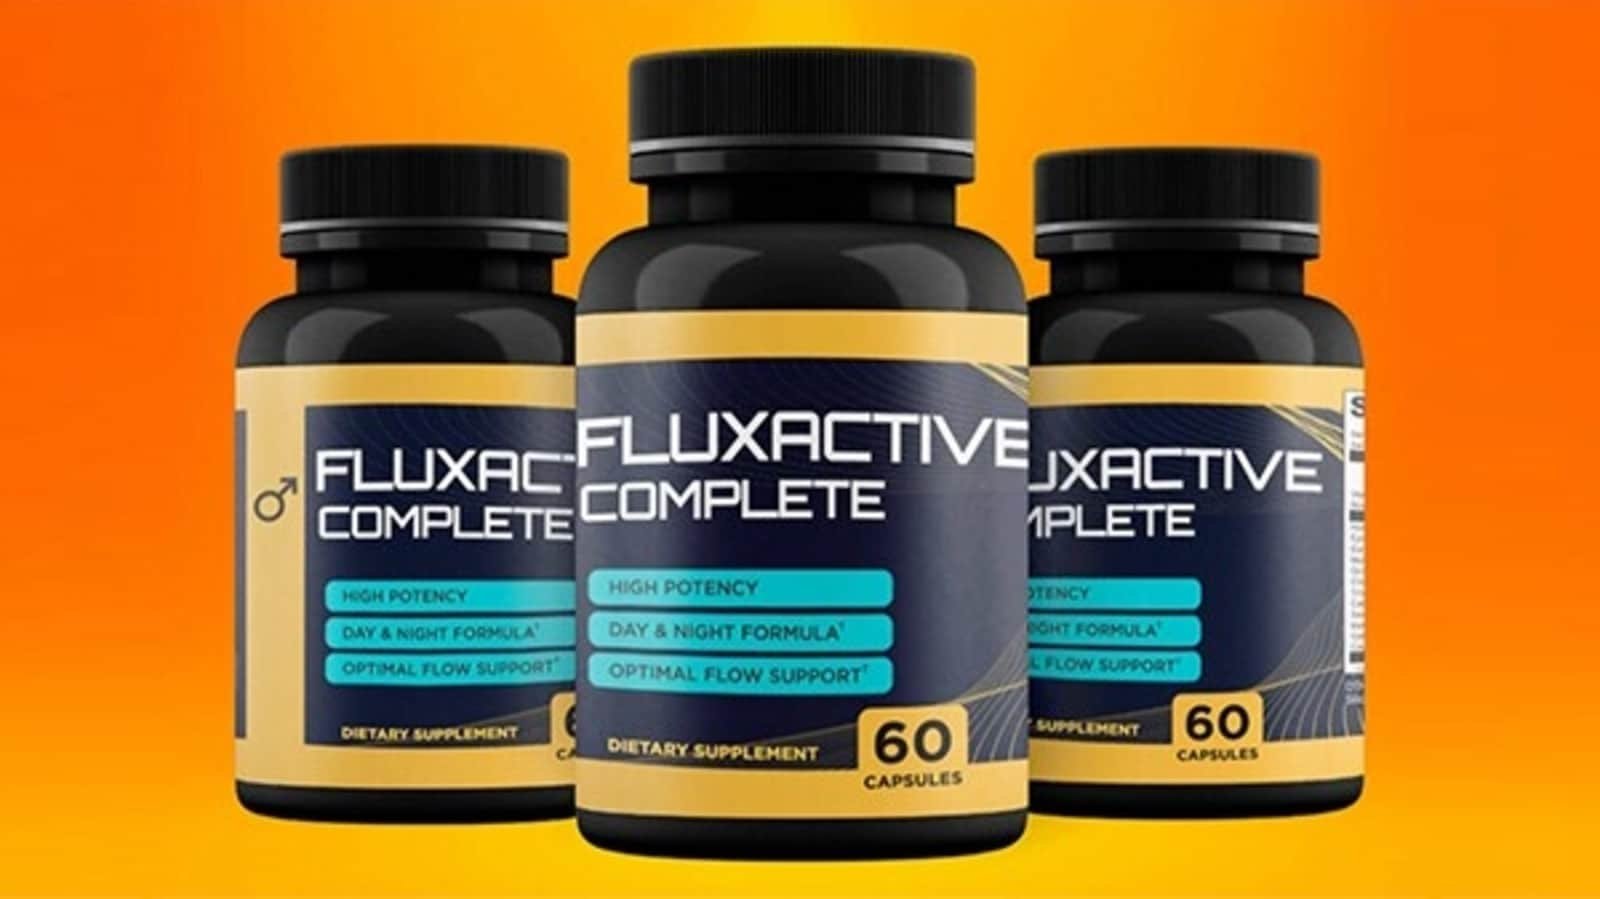 Fluxactive Complete Reviews - How Does It Work? cover